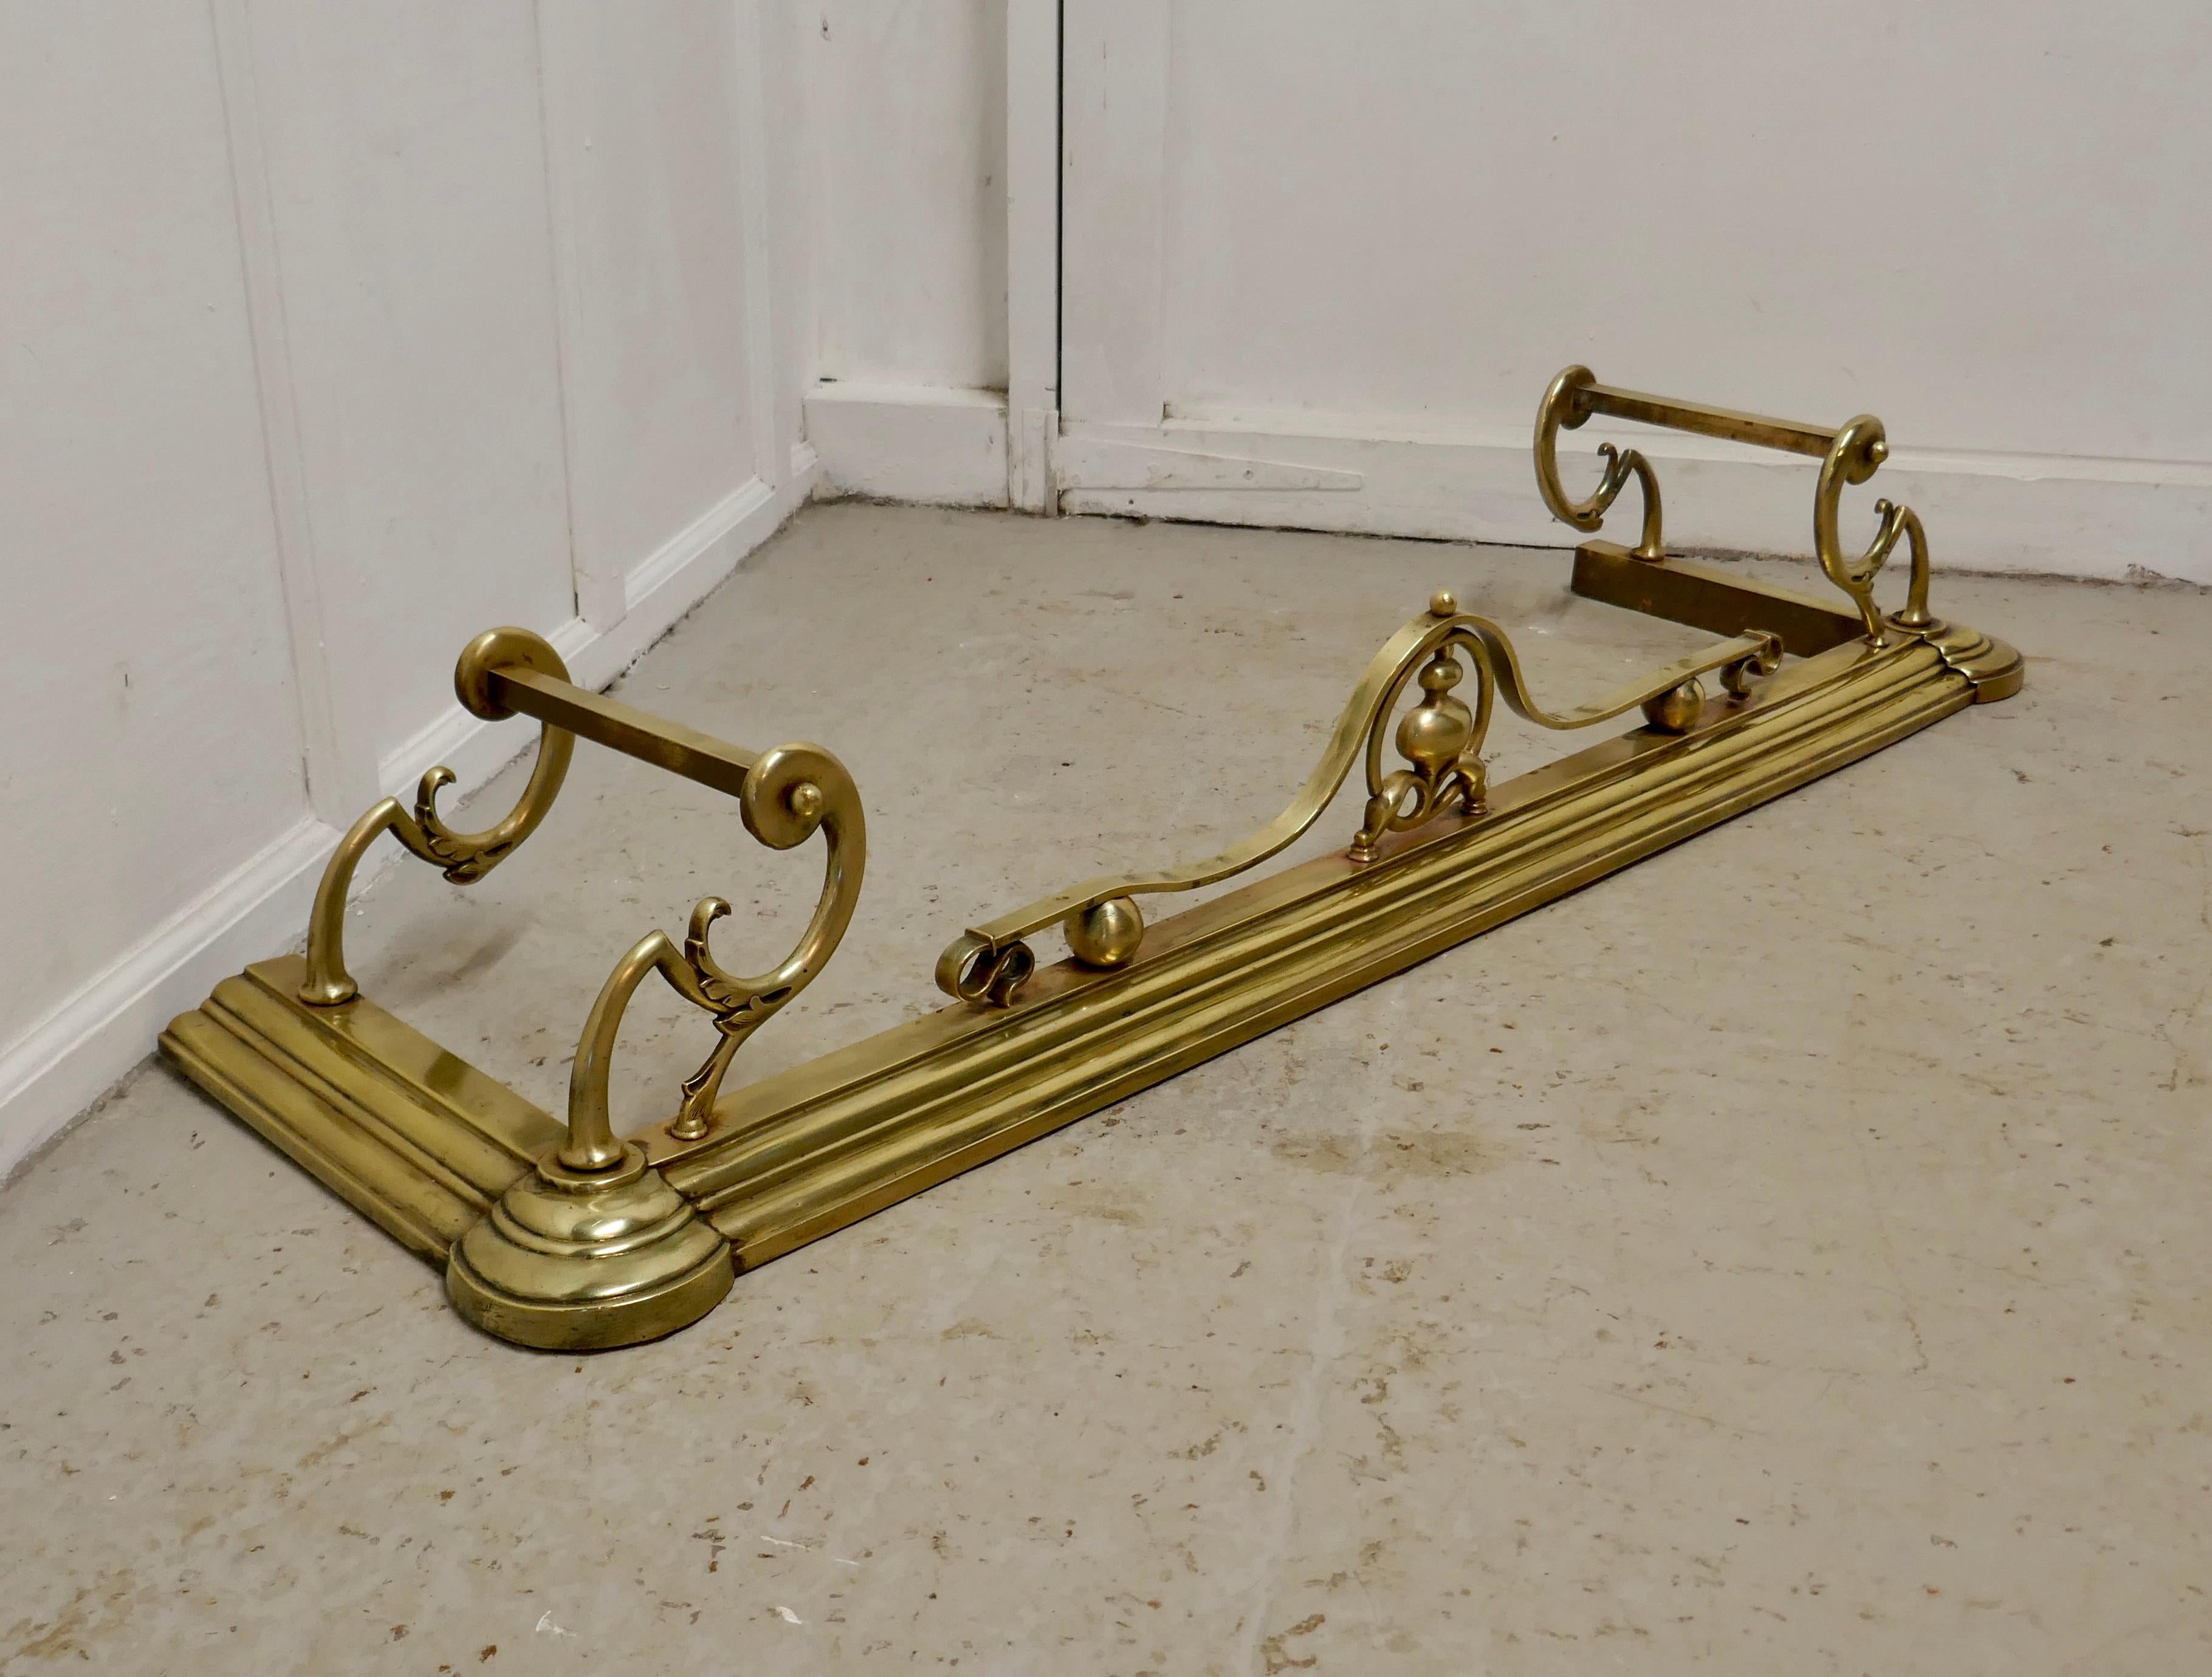 Large Victorian Art Nouveau brass fender

This is a beautifully designed Victorian brass fender it has superb Art Nouveau decoration worked in brass
The fender is in very good condition it is 9” high, and 56” long and 16” deep GB43.
  